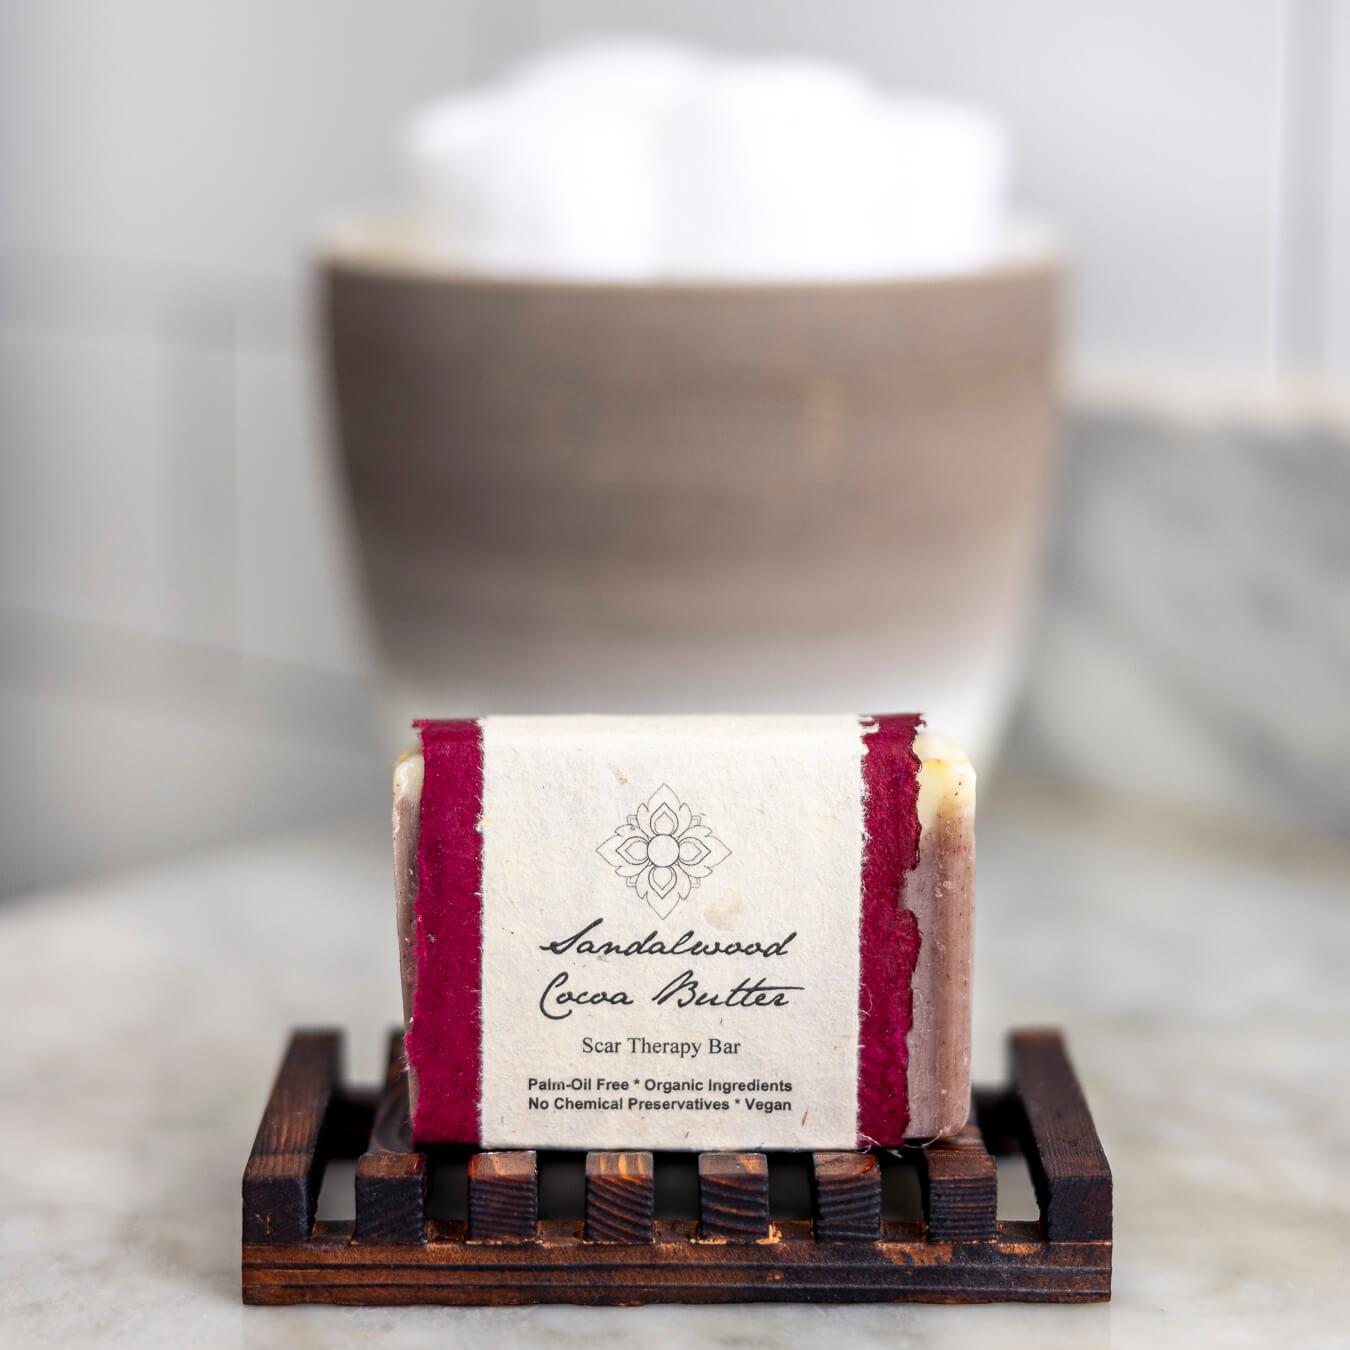 Bar of the Sandalwood Cocoa Butter soap on a stand in front of a vessel with towels